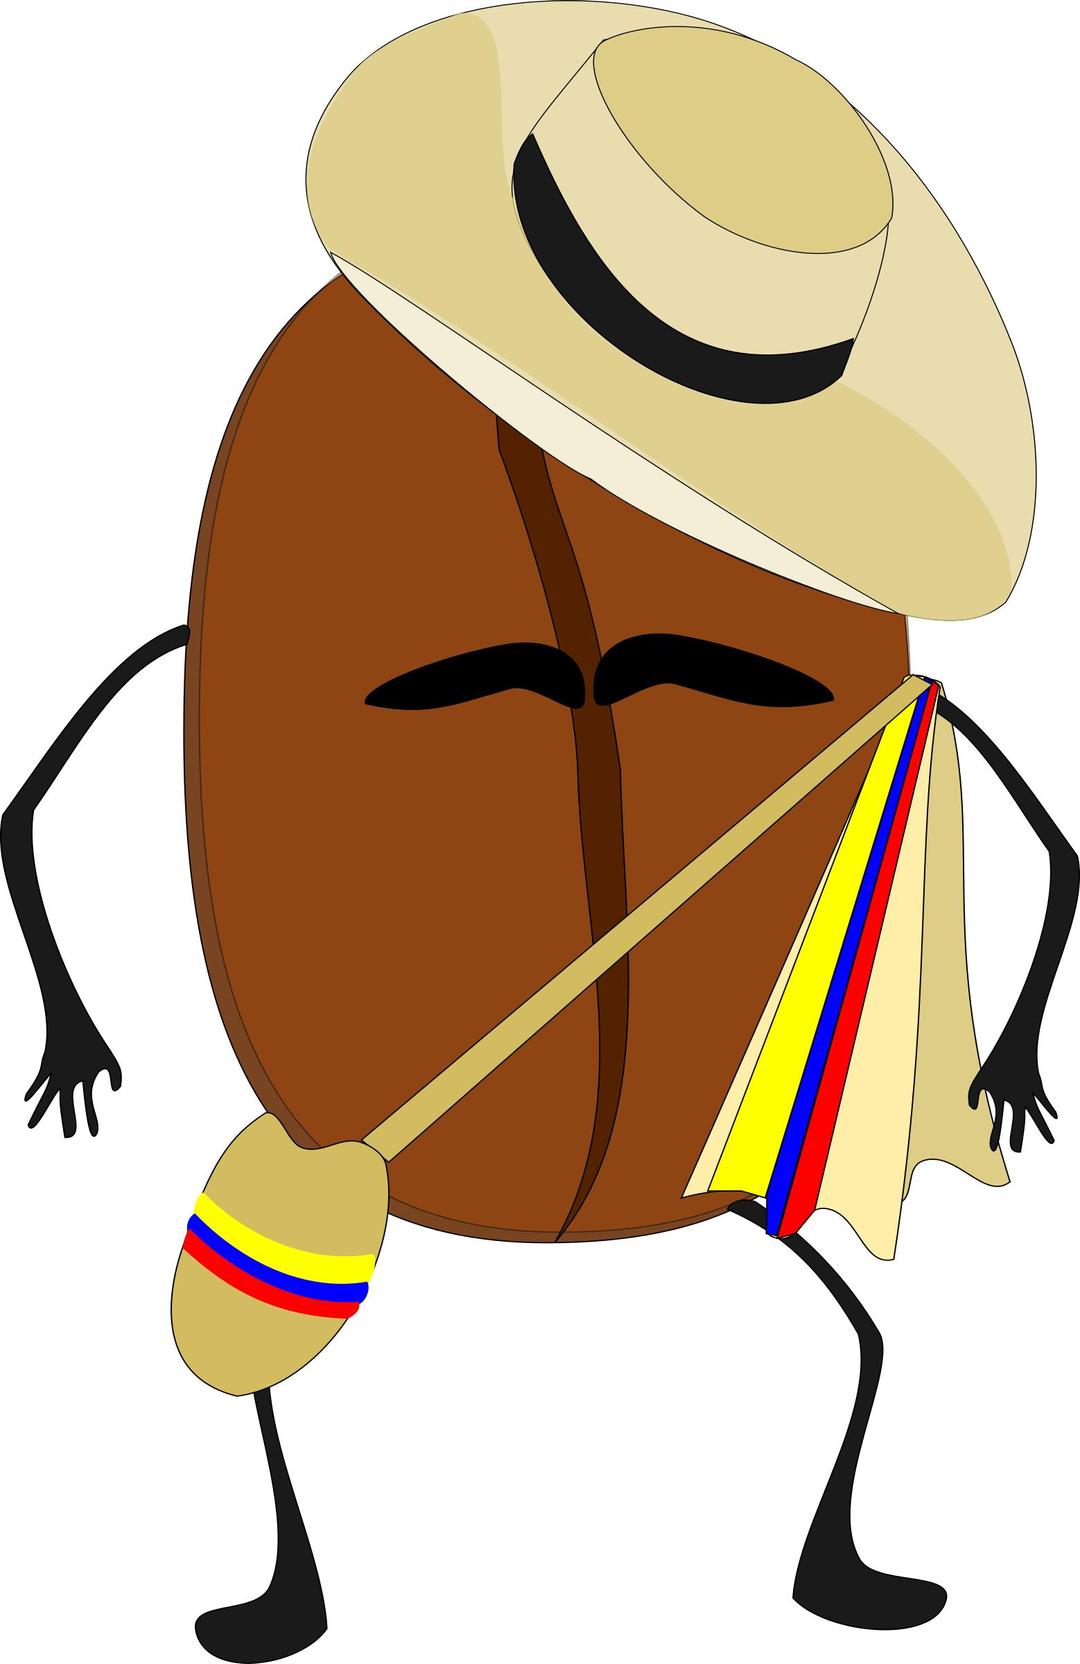 grano de cafe colombiano png transparent